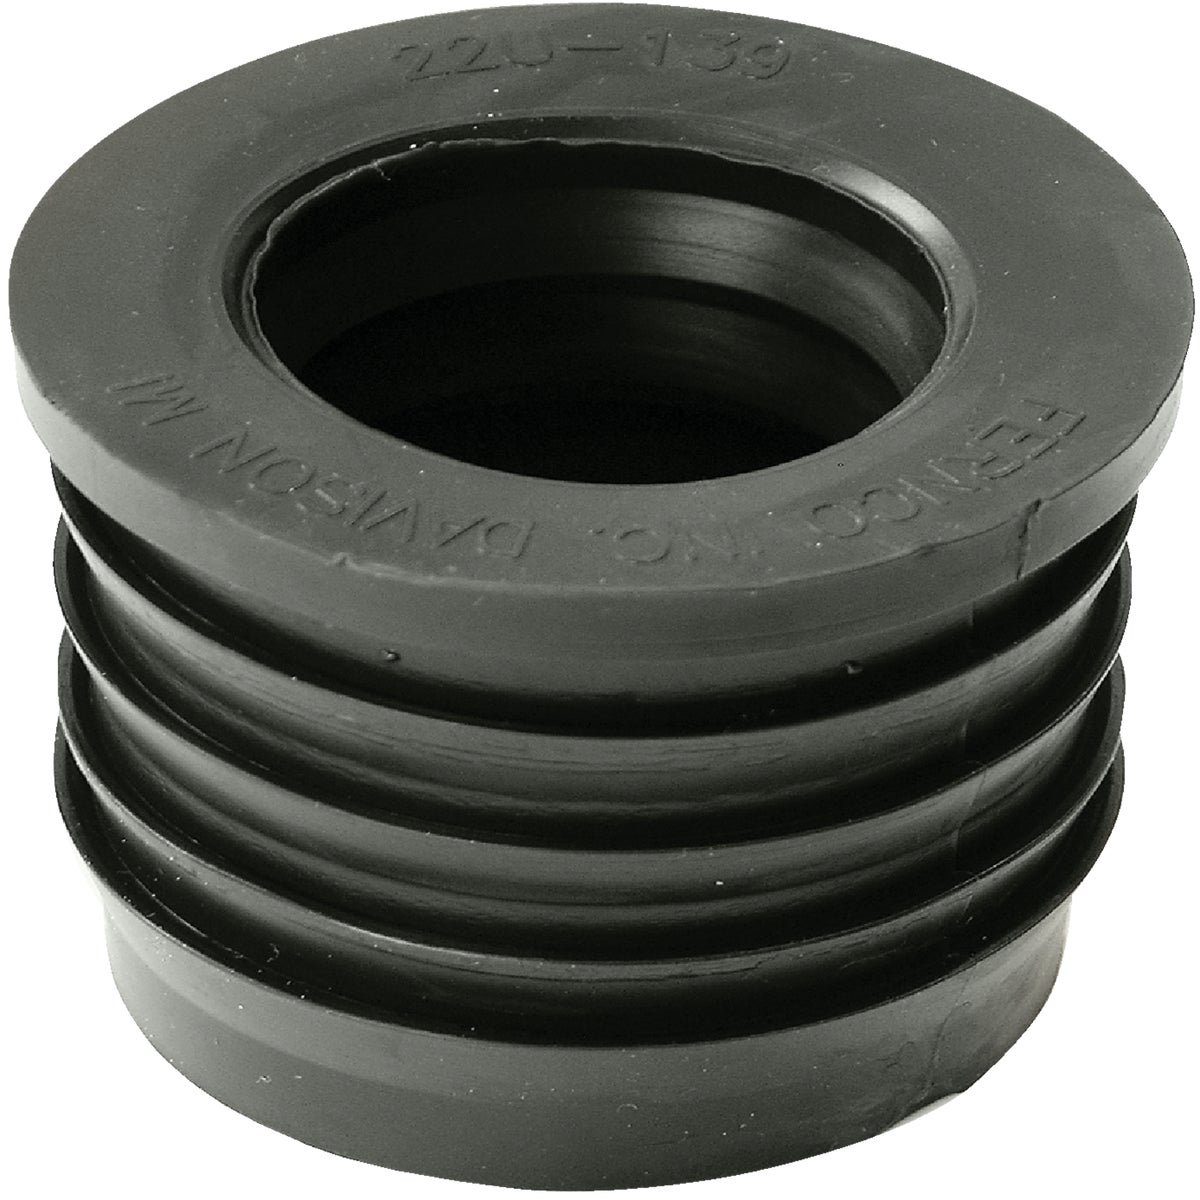 Fernco DWV 2 In. x 1-1/2 In. Sewer and Drain PVC Iron Pipe Hub Adapter